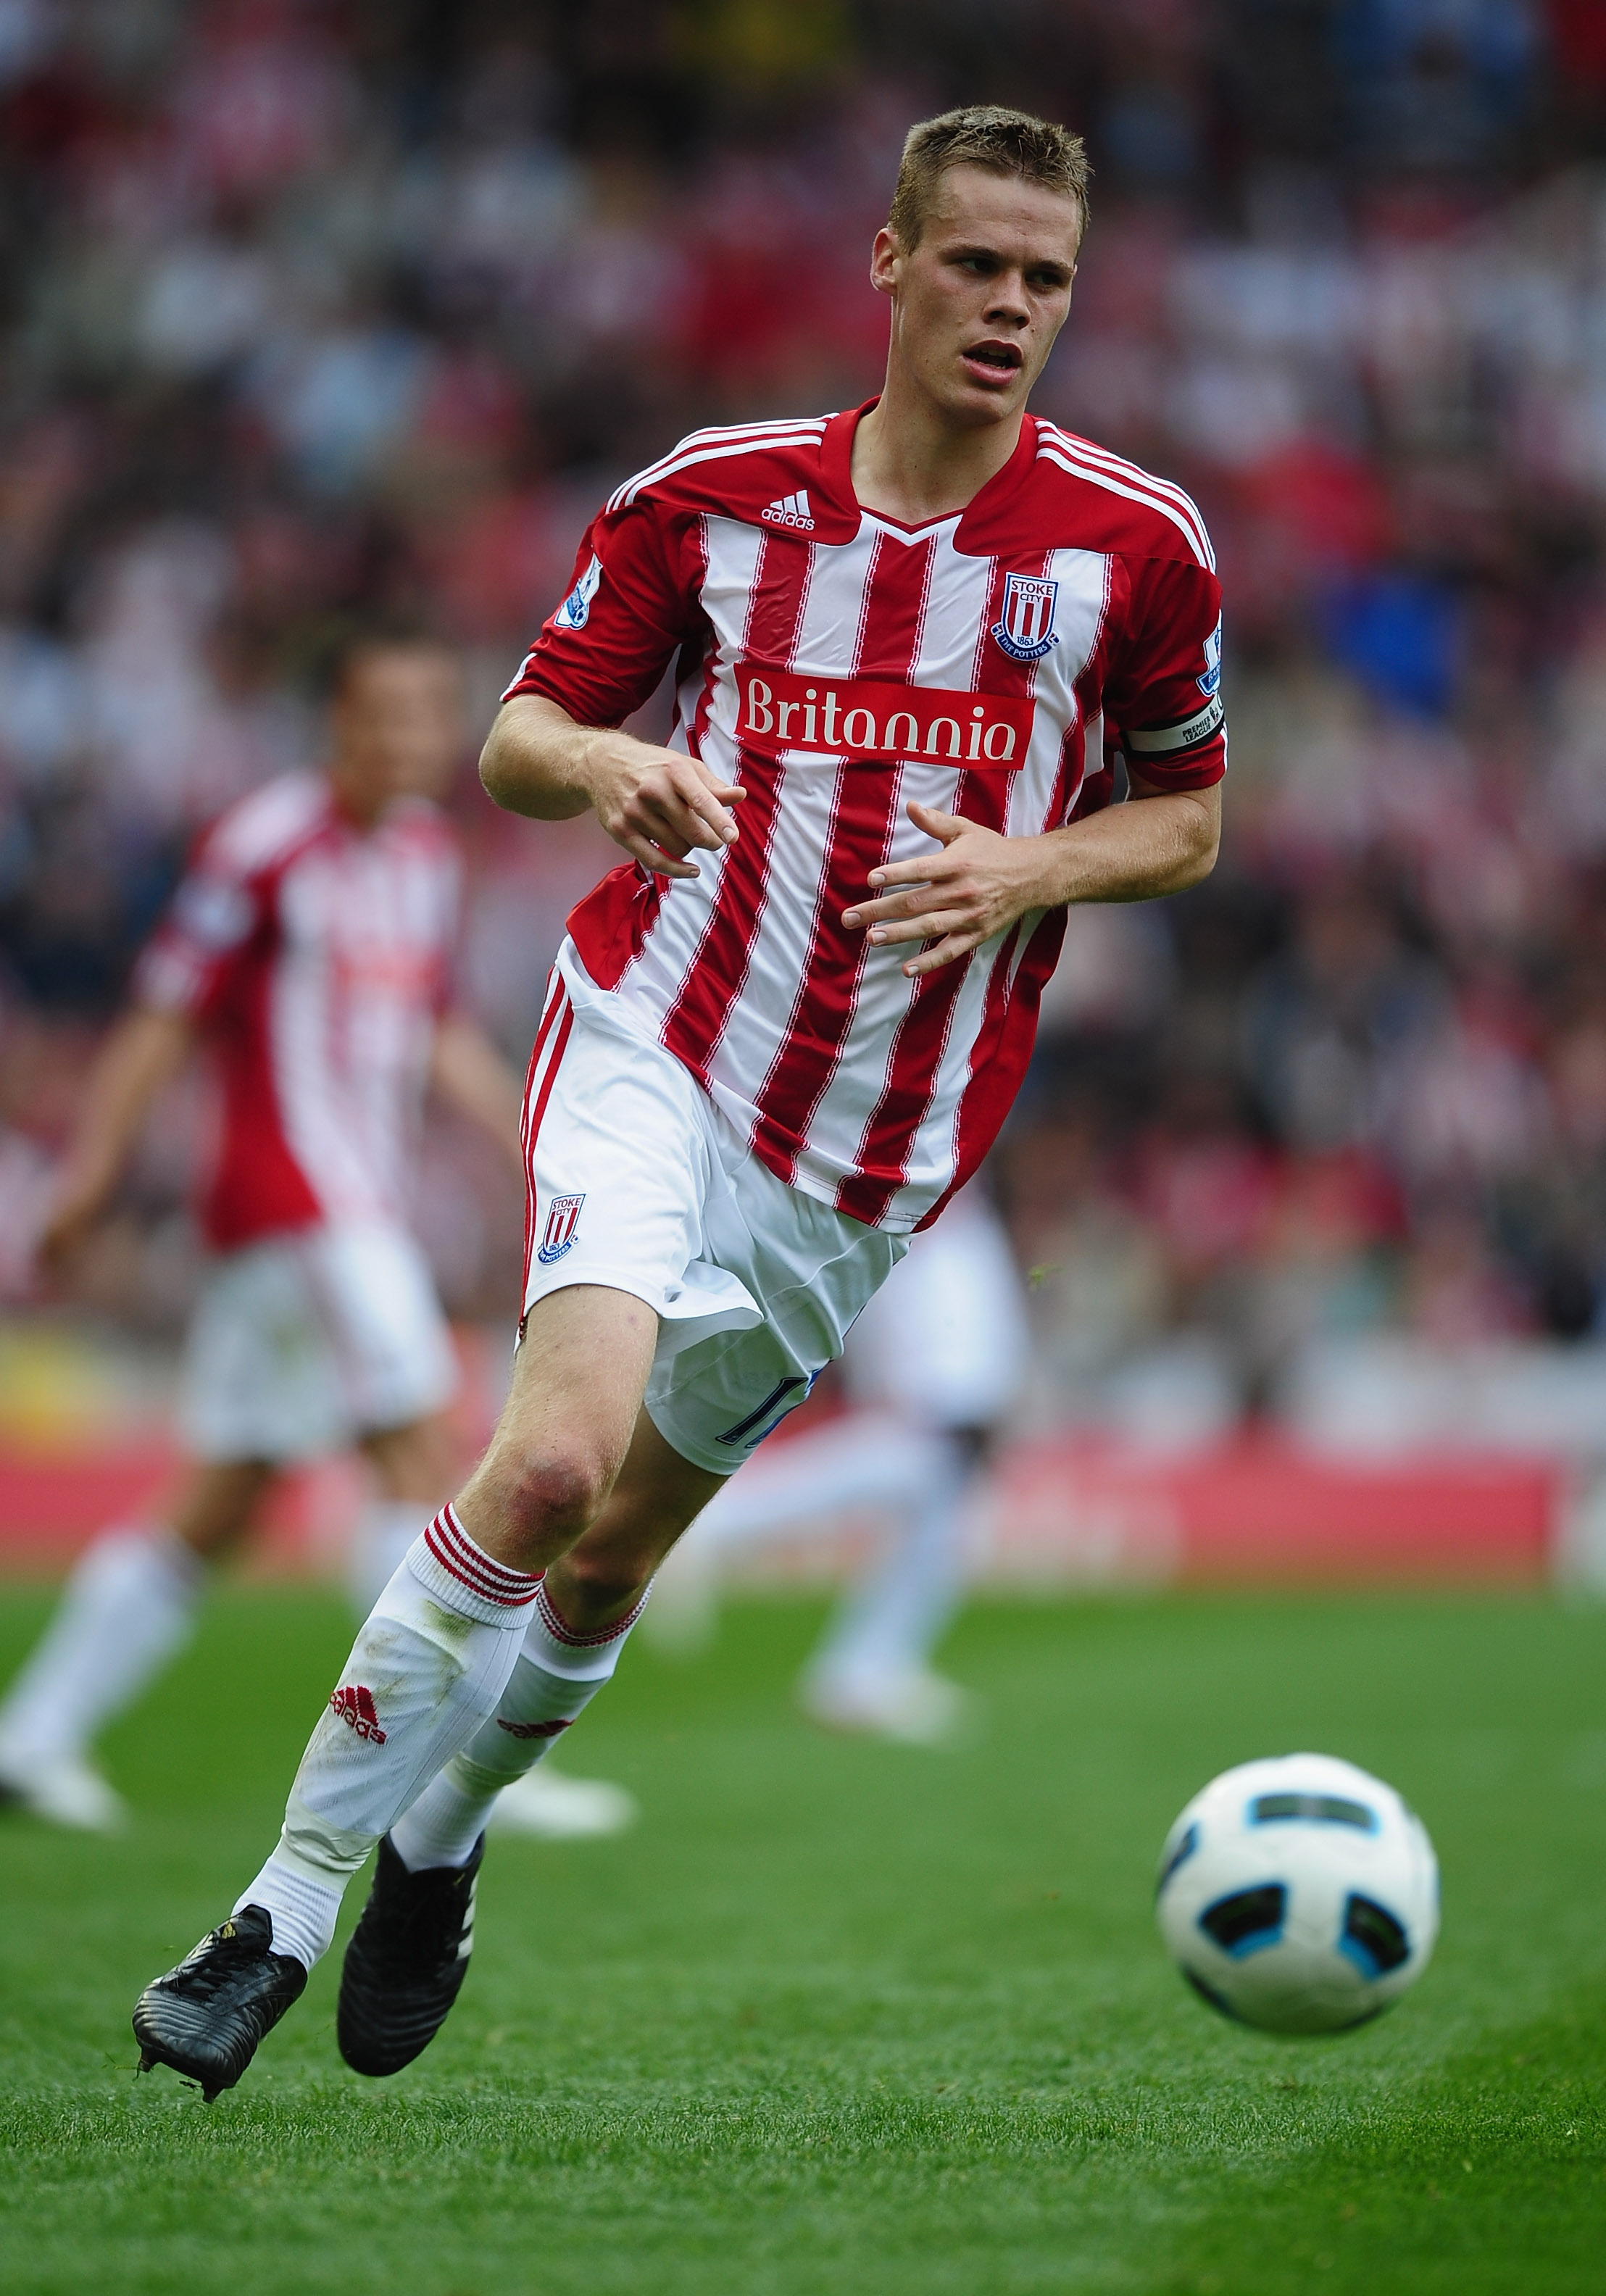 STOKE ON TRENT, ENGLAND - AUGUST 21:  Ryan Shawcross of Stoke in action during the Barclays Premier League match between Stoke City and Tottenham Hotspur at the Britannia Stadium on August 21, 2010 in Stoke on Trent, England.  (Photo by Laurence Griffiths